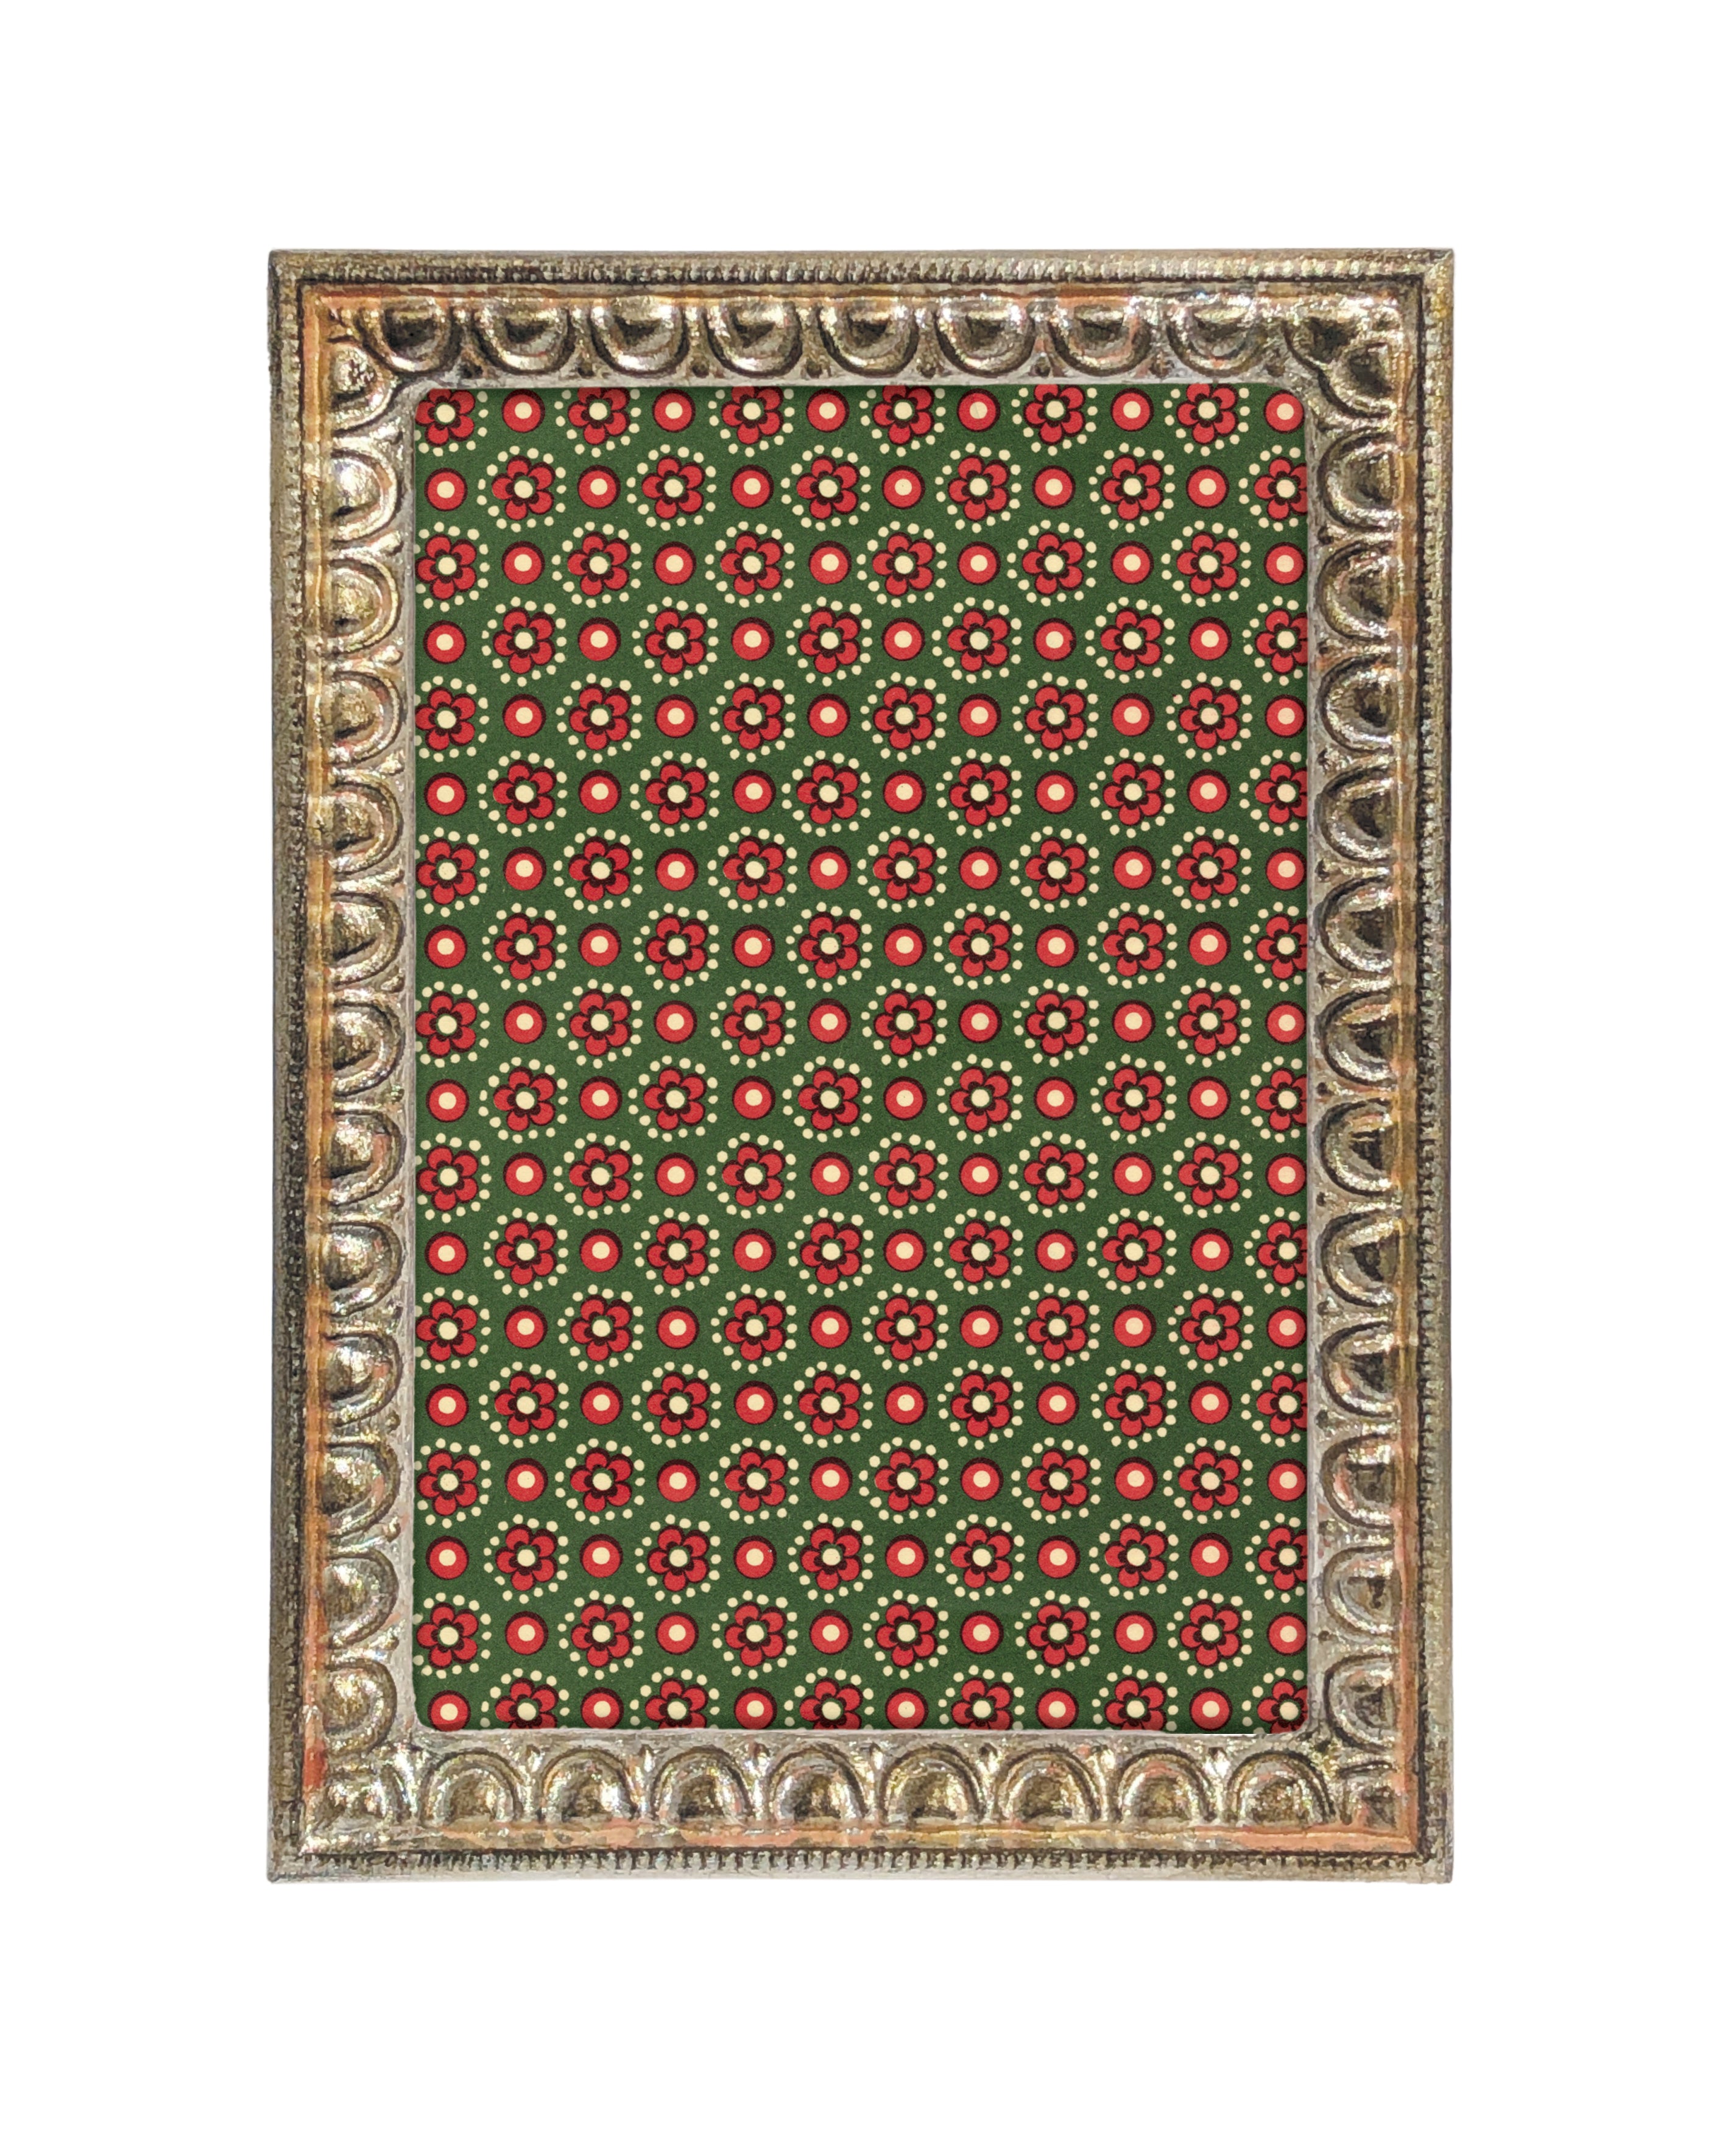 image of Cavallini & Co. 5 by 7 Inch Umbria Silver Florentine Frame